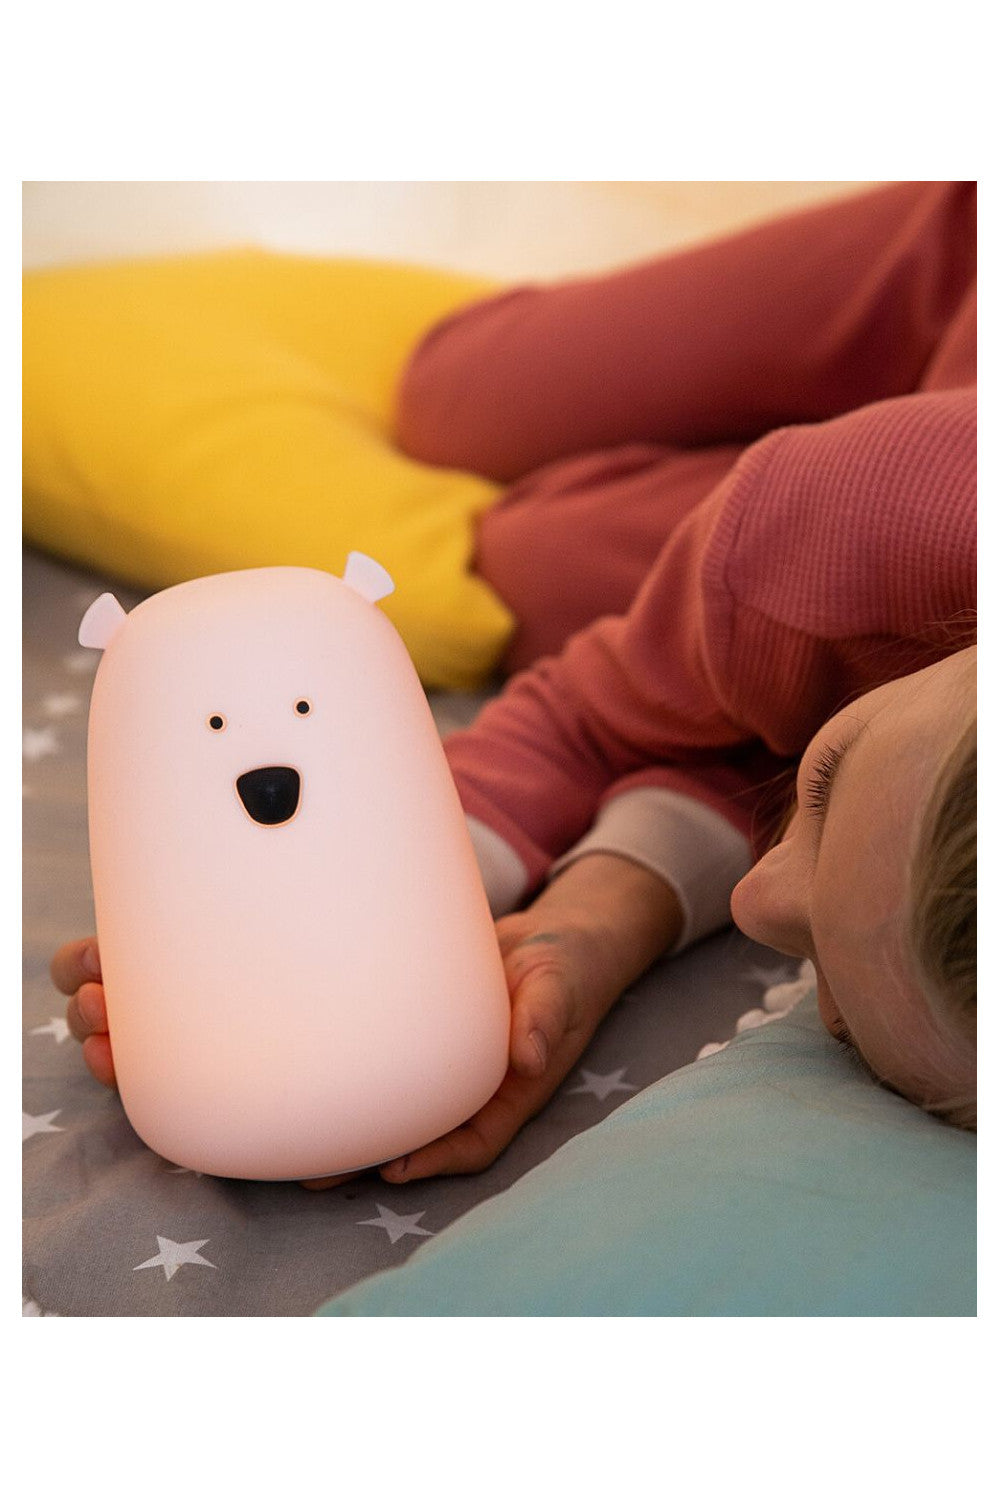 A white silicone lamp shaped like a teddy bear with protruding ears, piercing eyes, and a round belly. Soft, touchable, and portable, perfect for bedtime routines and comforting children.